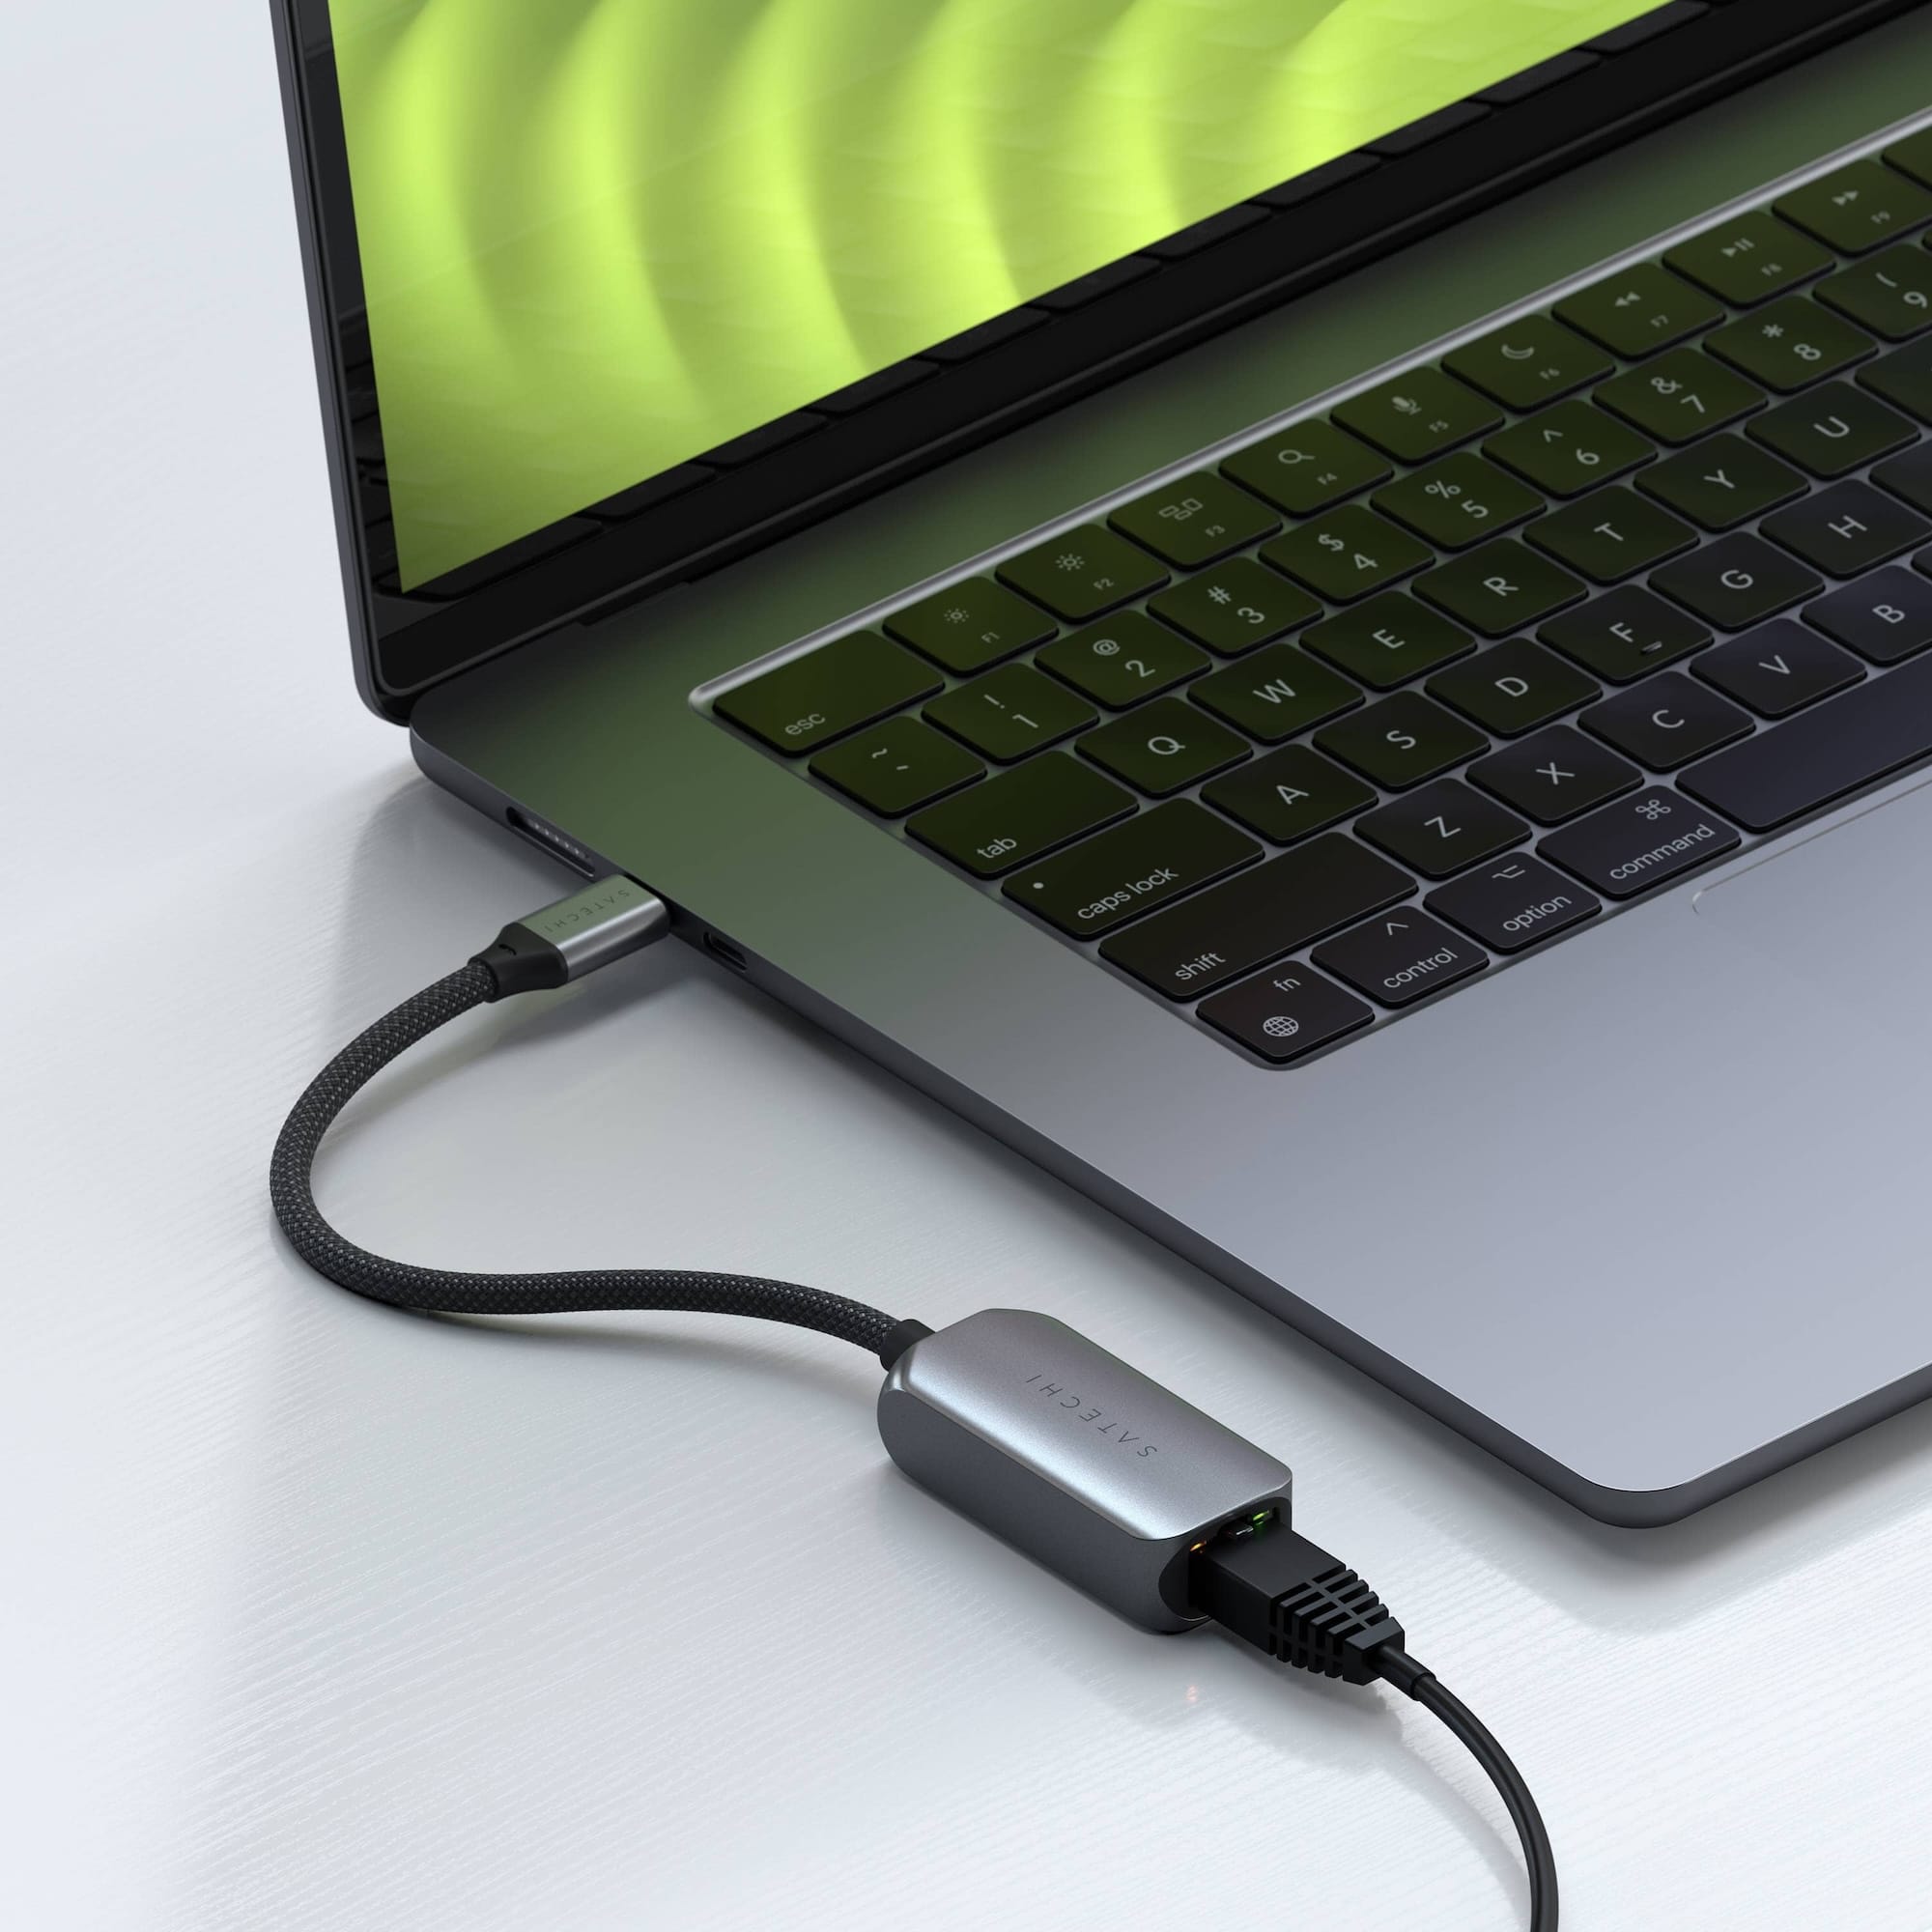 Satechi、USB-C – 2.5Gbps Ethernet変換アダプタ＆USB-C – HDMI 2.1変換アダプタ/ケーブルを発売